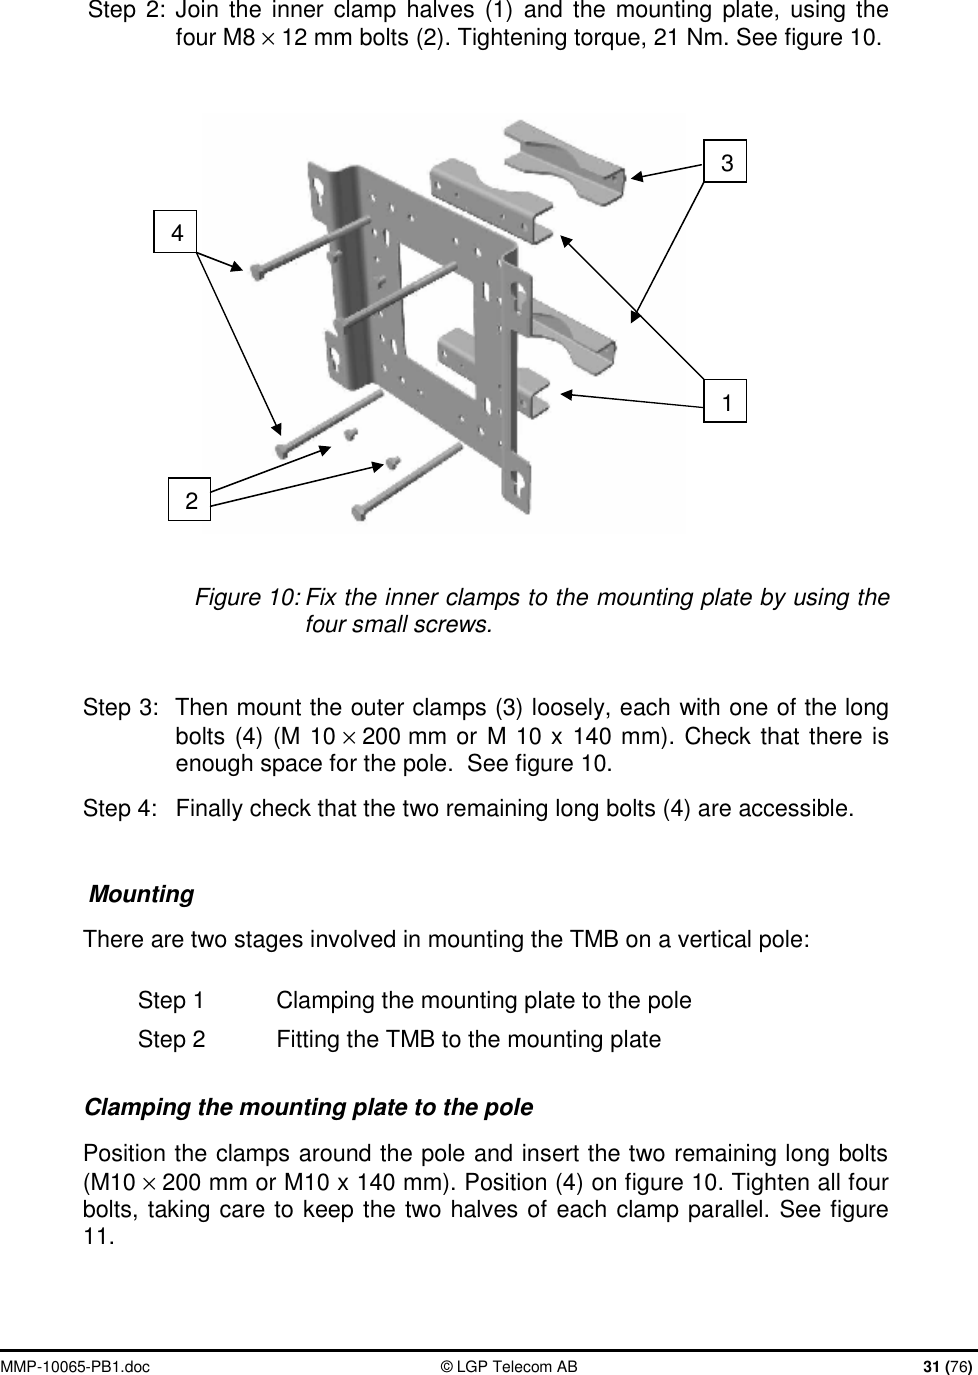  MMP-10065-PB1.doc  © LGP Telecom AB  31 (76)  Step 2: Join the inner clamp halves (1) and the mounting plate, using the four M8 × 12 mm bolts (2). Tightening torque, 21 Nm. See figure 10.    Figure 10: Fix the inner clamps to the mounting plate by using the four small screws.  Step 3:  Then mount the outer clamps (3) loosely, each with one of the long bolts (4) (M 10 × 200 mm or M 10 x 140 mm). Check that there is enough space for the pole.  See figure 10. Step 4:  Finally check that the two remaining long bolts (4) are accessible.  Mounting There are two stages involved in mounting the TMB on a vertical pole: Step 1  Clamping the mounting plate to the pole Step 2  Fitting the TMB to the mounting plate Clamping the mounting plate to the pole Position the clamps around the pole and insert the two remaining long bolts (M10 × 200 mm or M10 x 140 mm). Position (4) on figure 10. Tighten all four bolts, taking care to keep the two halves of each clamp parallel. See figure 11.   1 2 4 3 